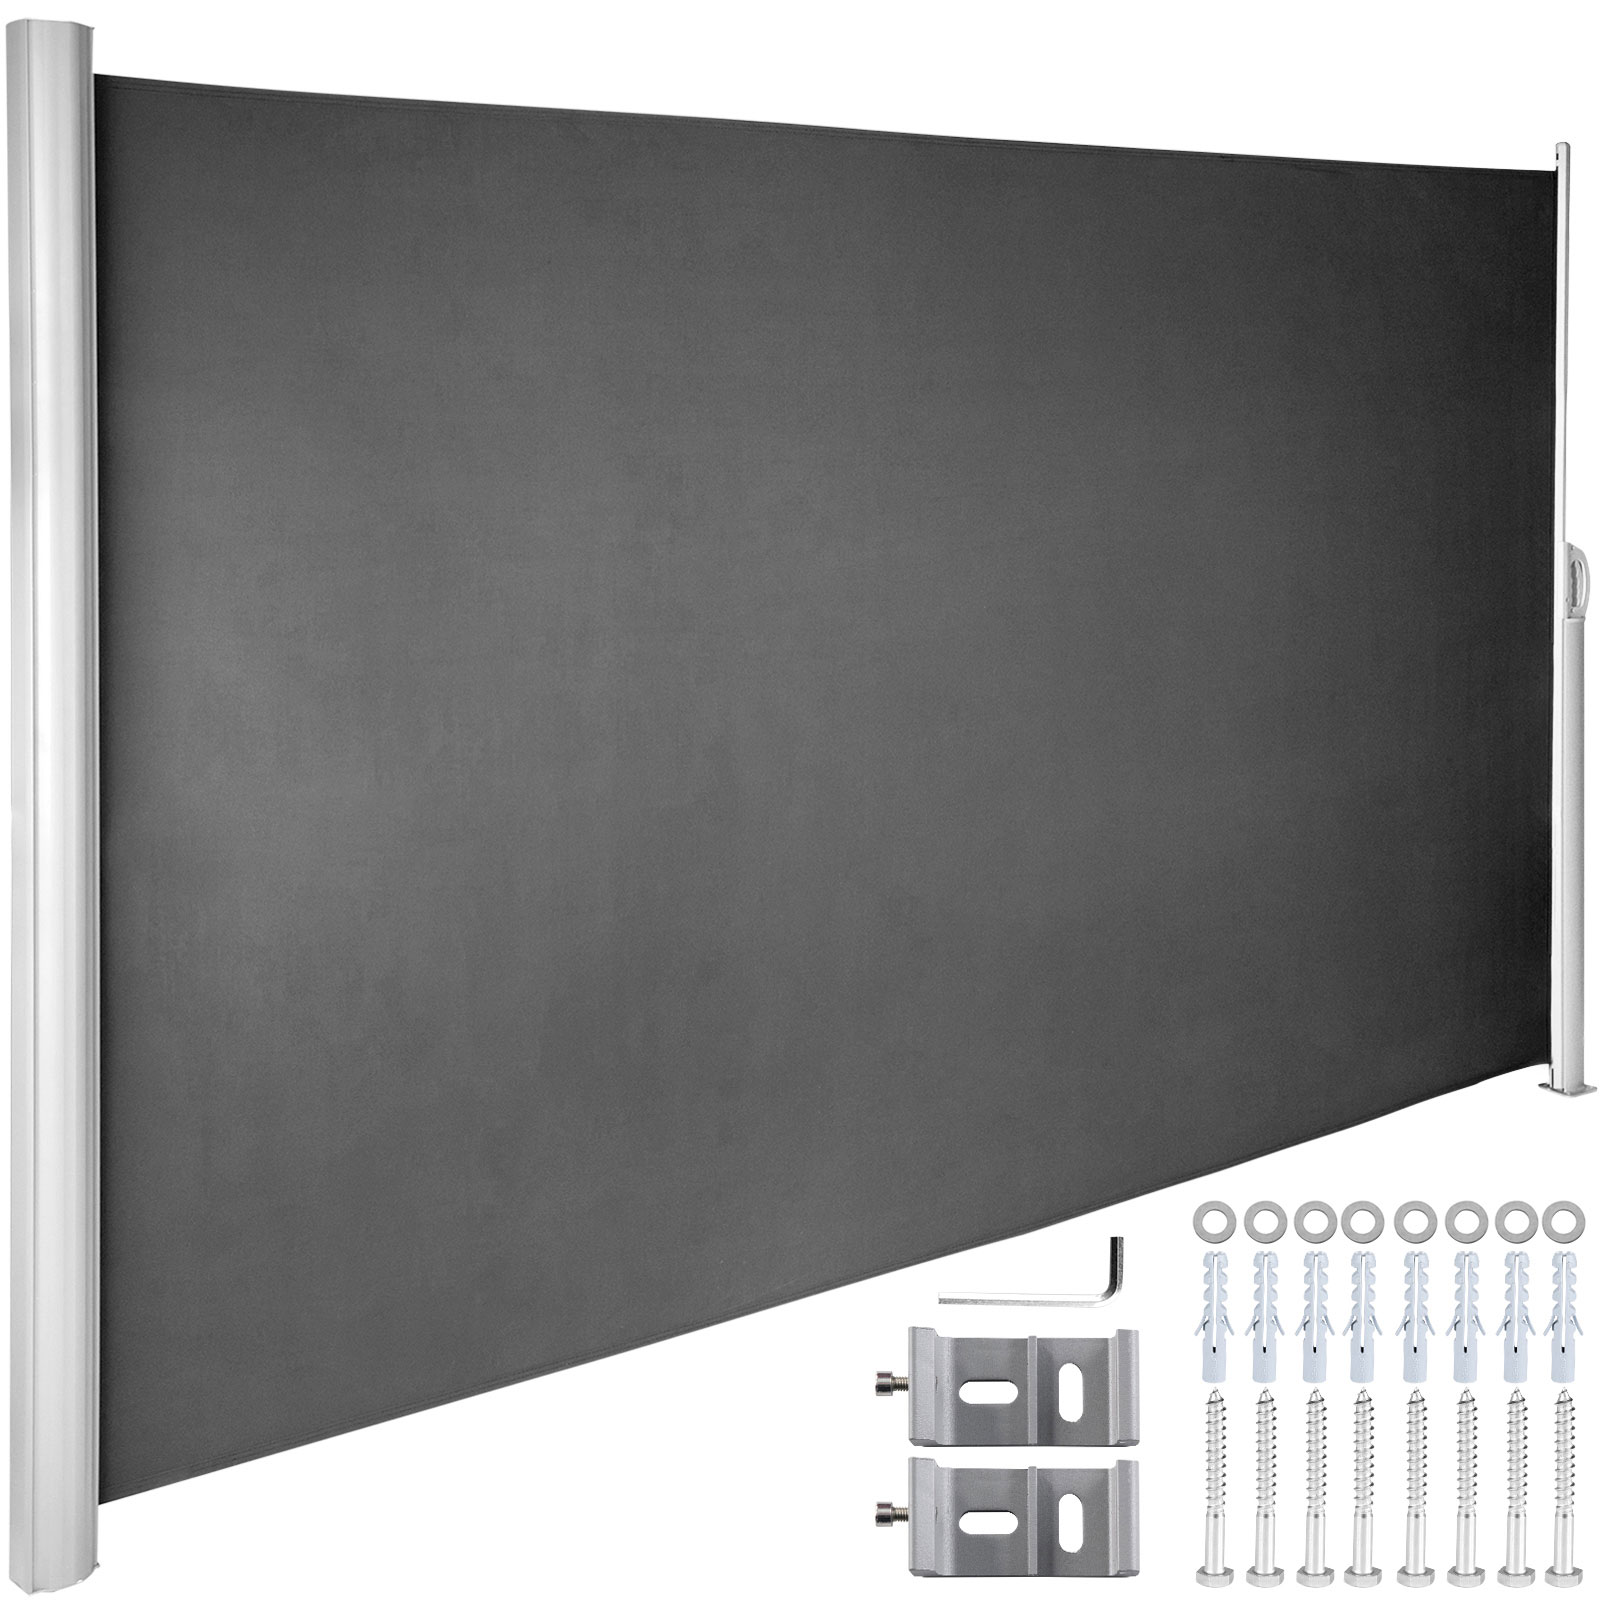 https://d2qc09rl1gfuof.cloudfront.net/product/ZYPF160X300CMBK01/retractable-patio-screen-m100-1.2.jpg